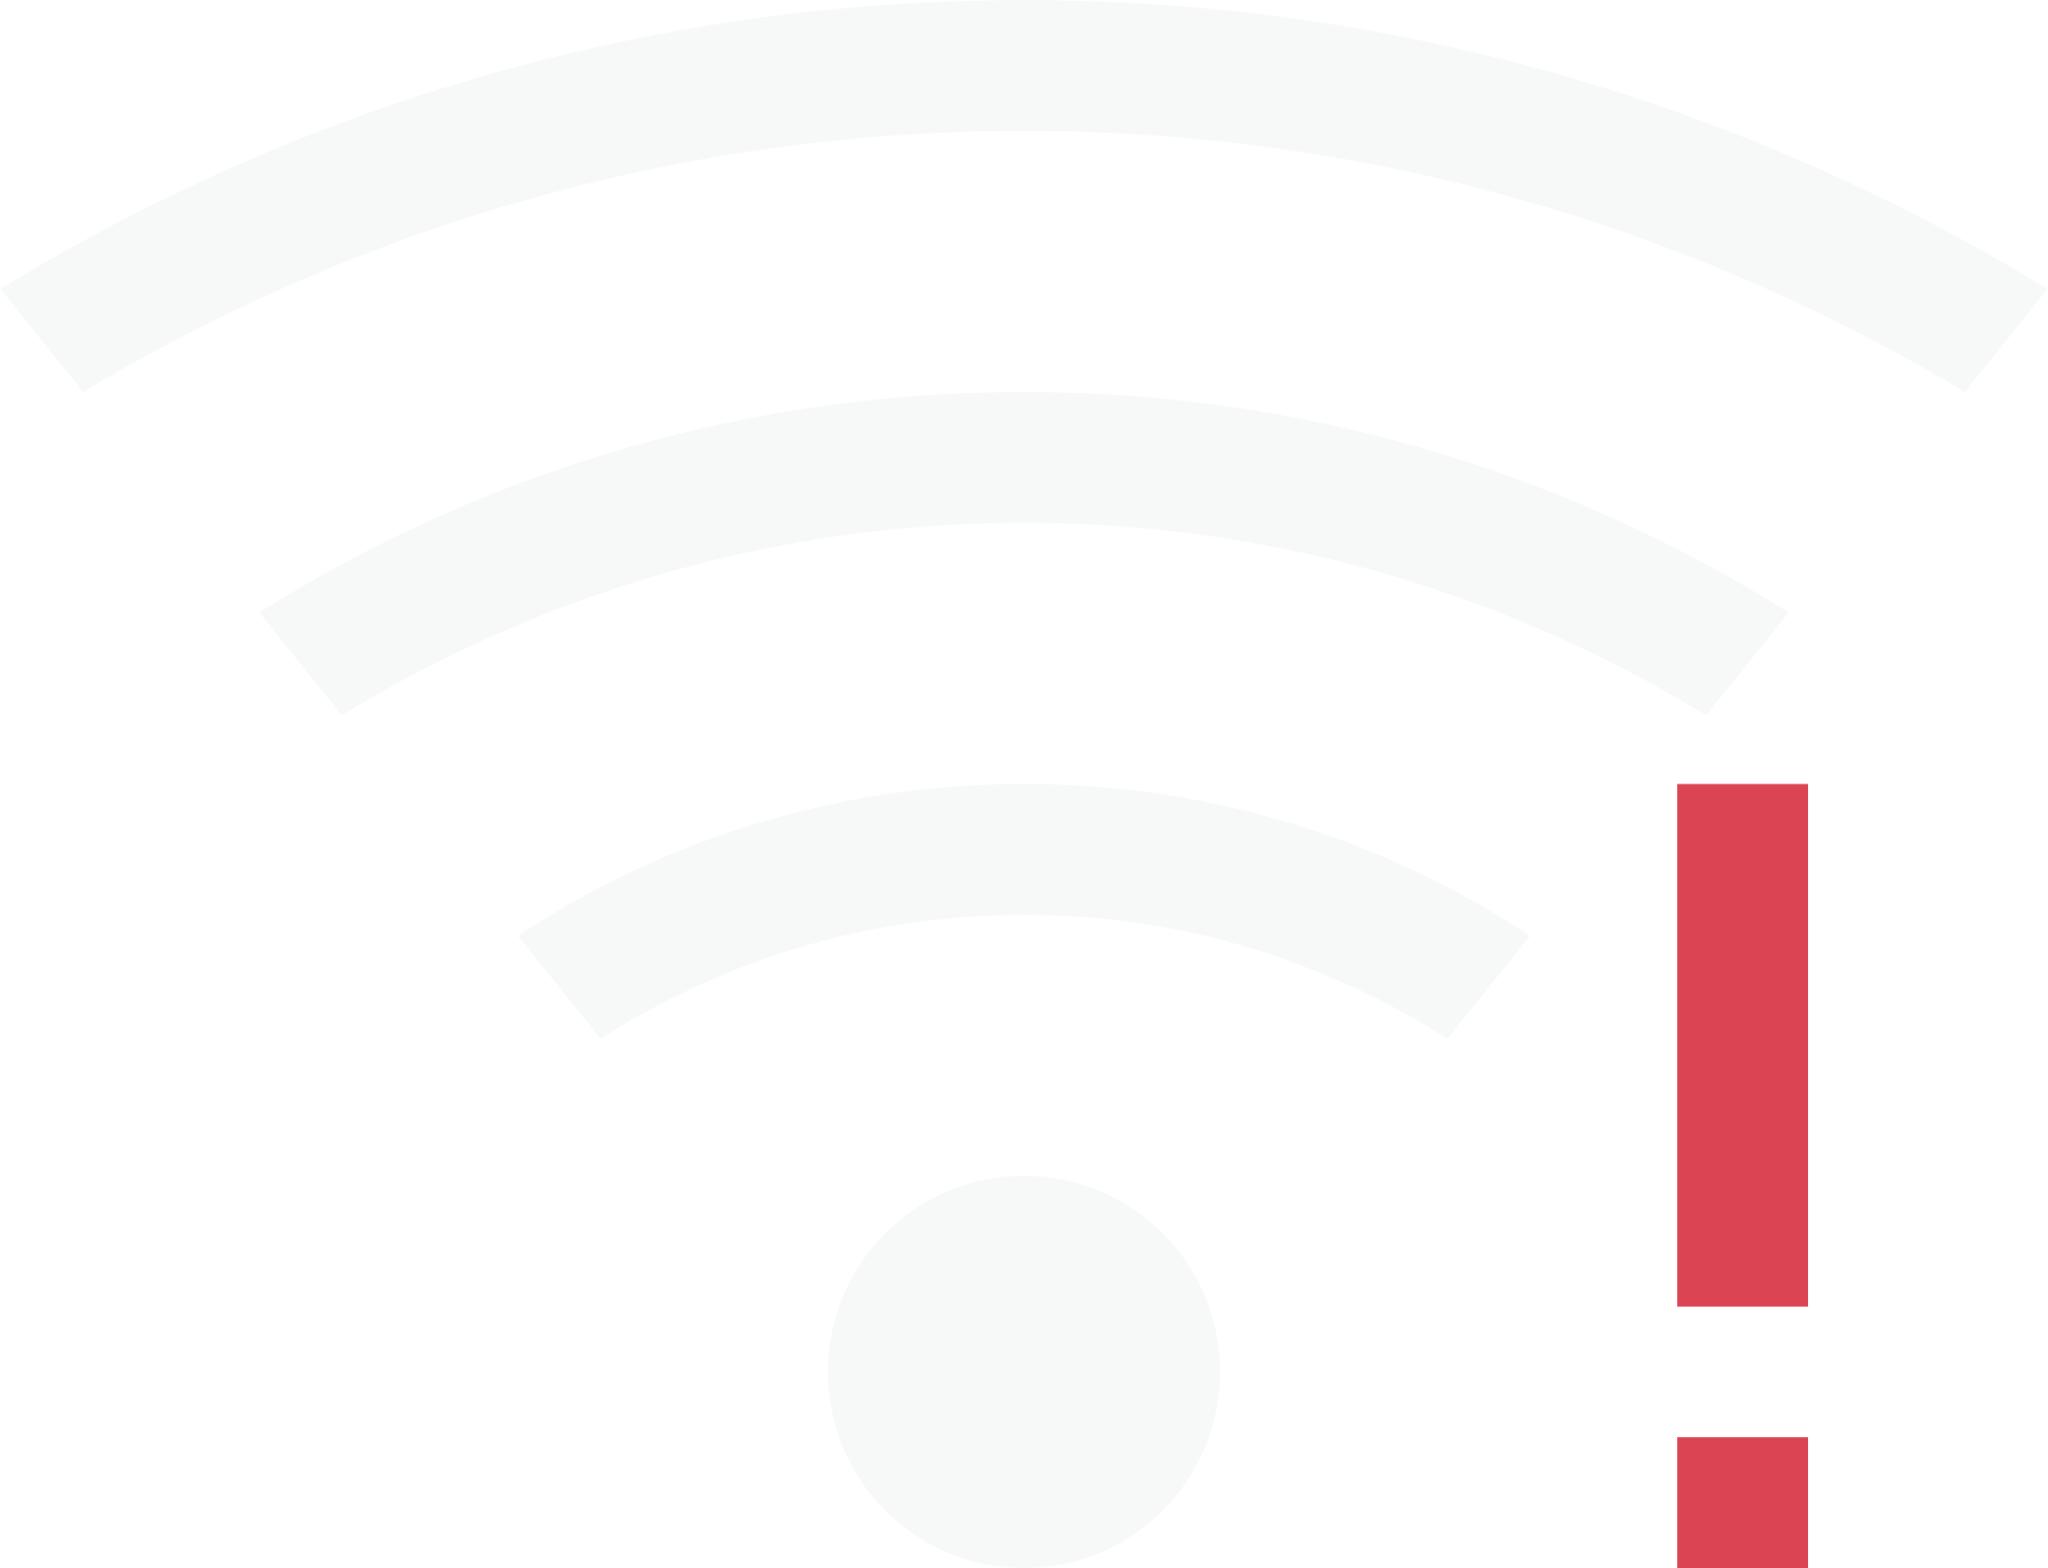 network wireless connected 00 icon